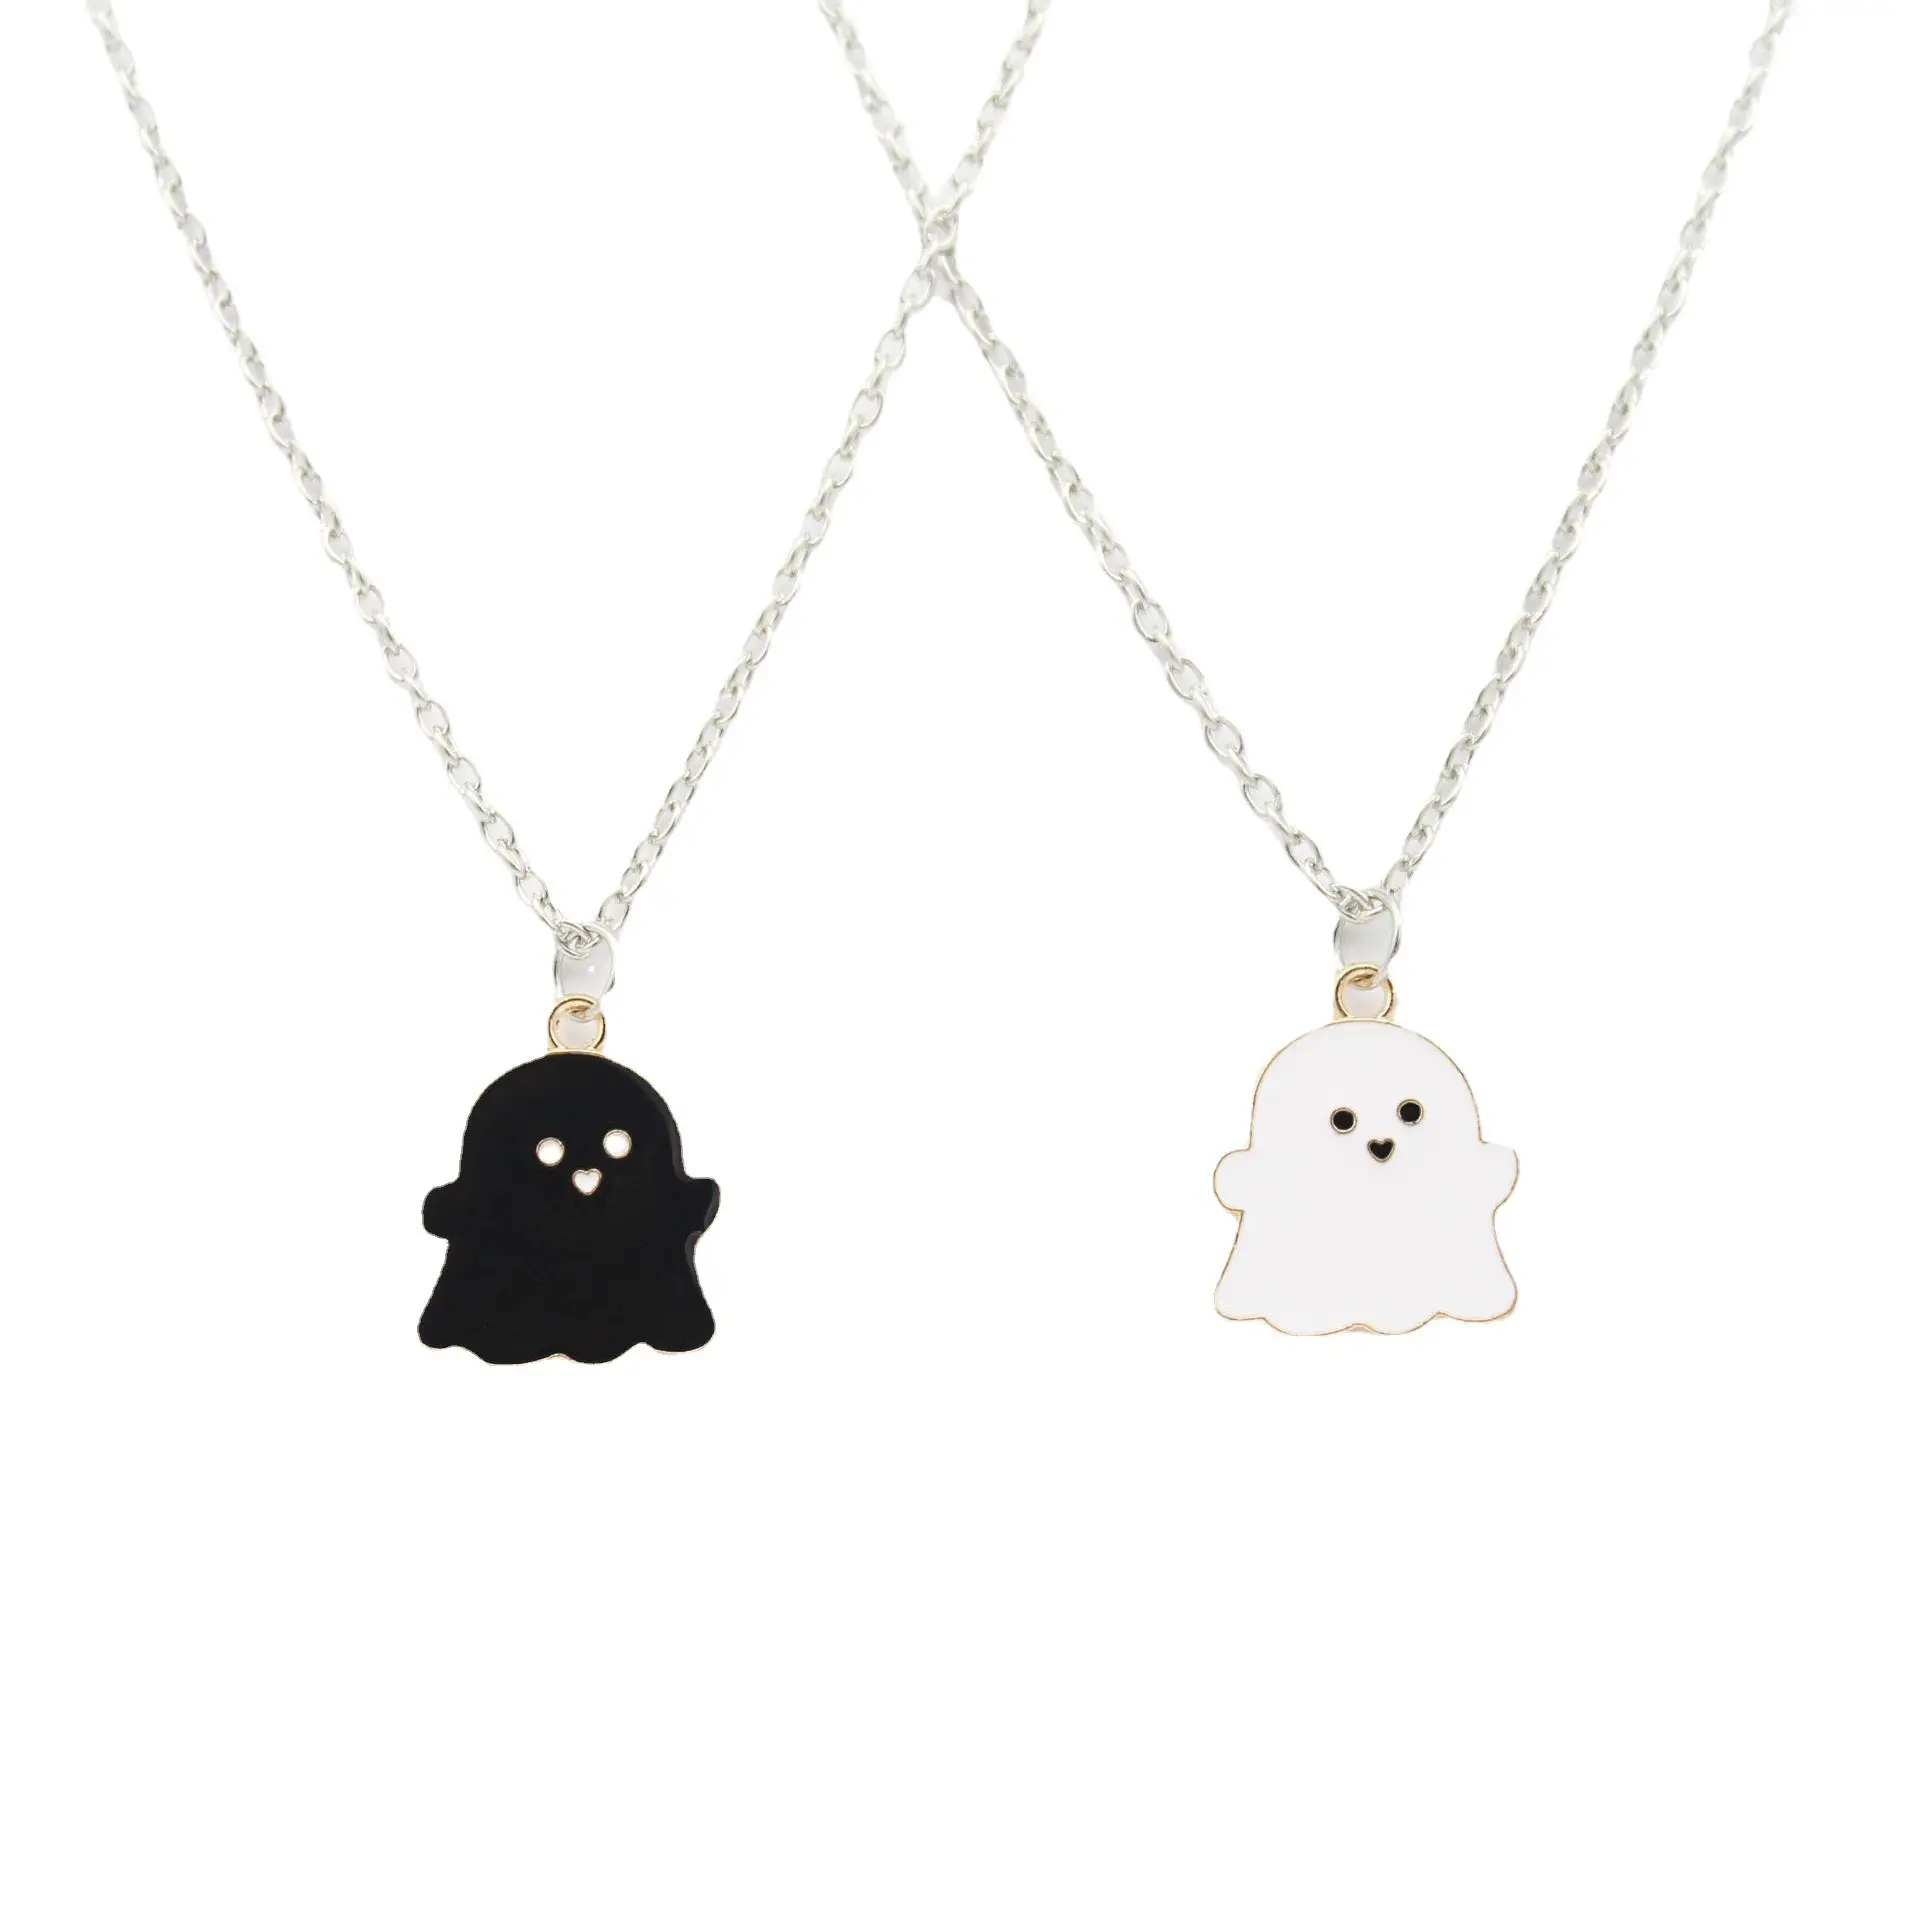 Cute Black And White Creative Ghost Pendant Necklace For Women Men Friends Lovely Ghost Face Halloween Necklace Jewelry